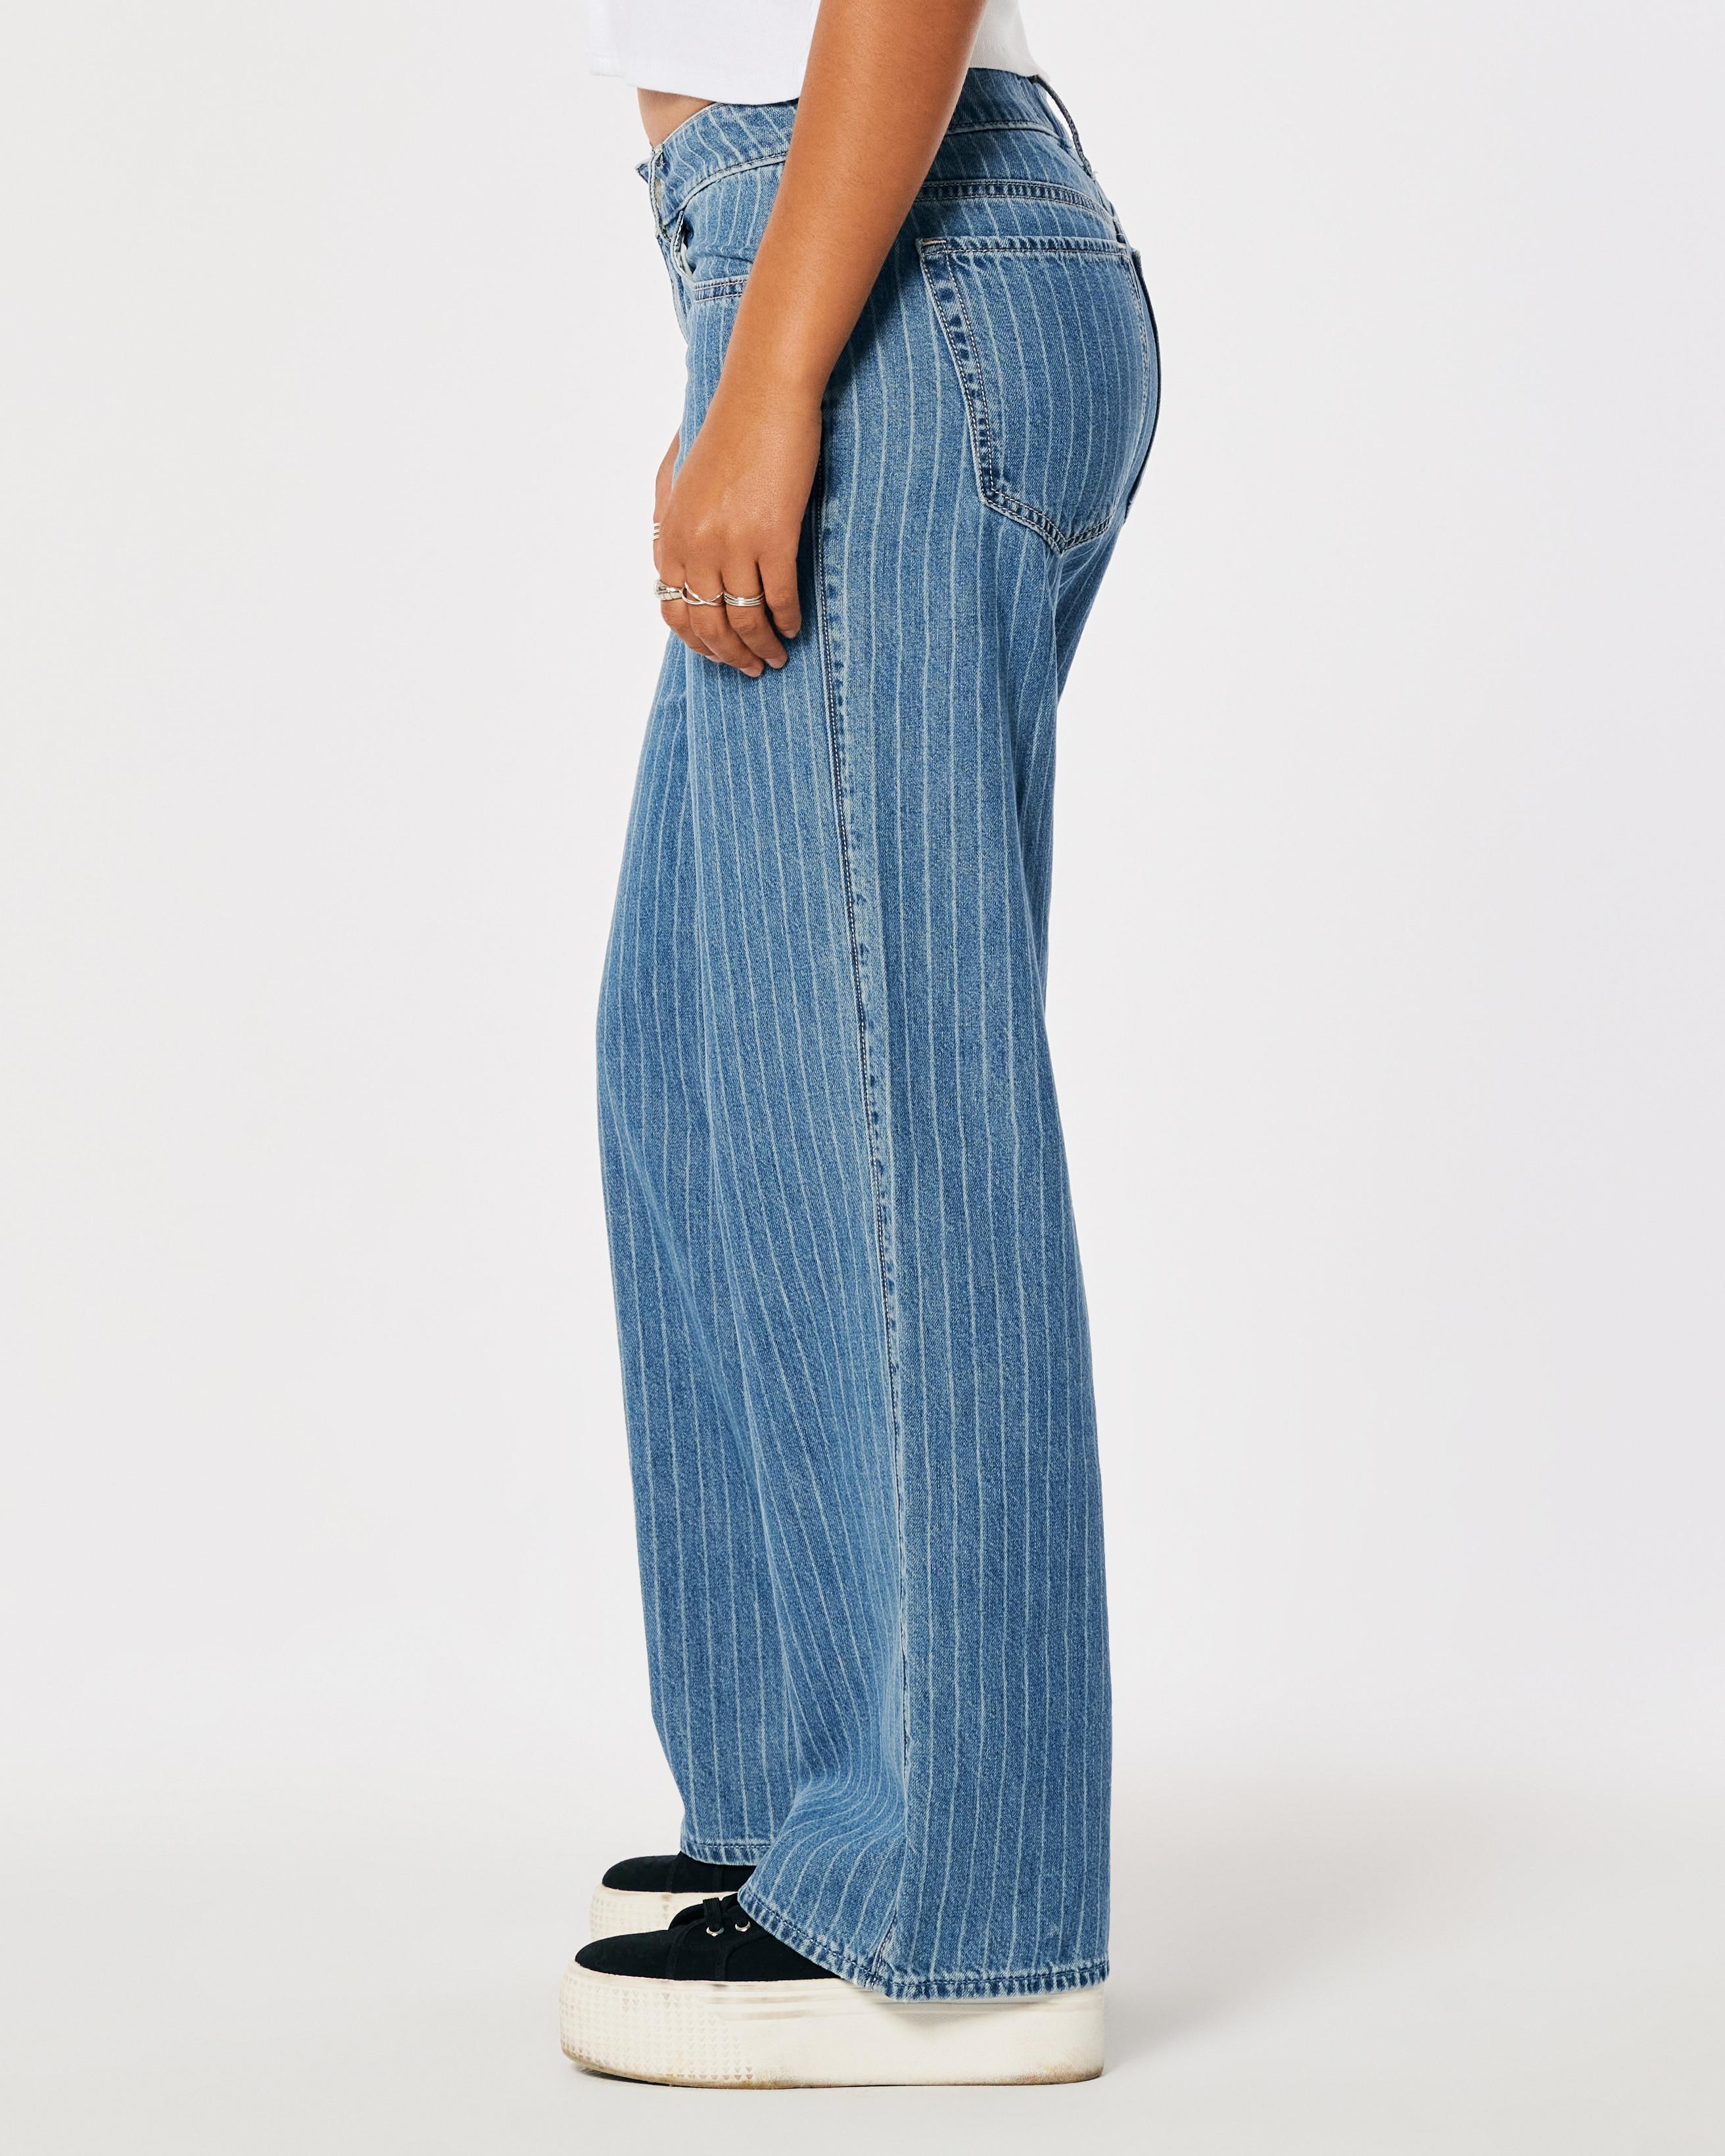 Women's Lightweight Low-Rise Medium Wash Striped Baggy Jeans